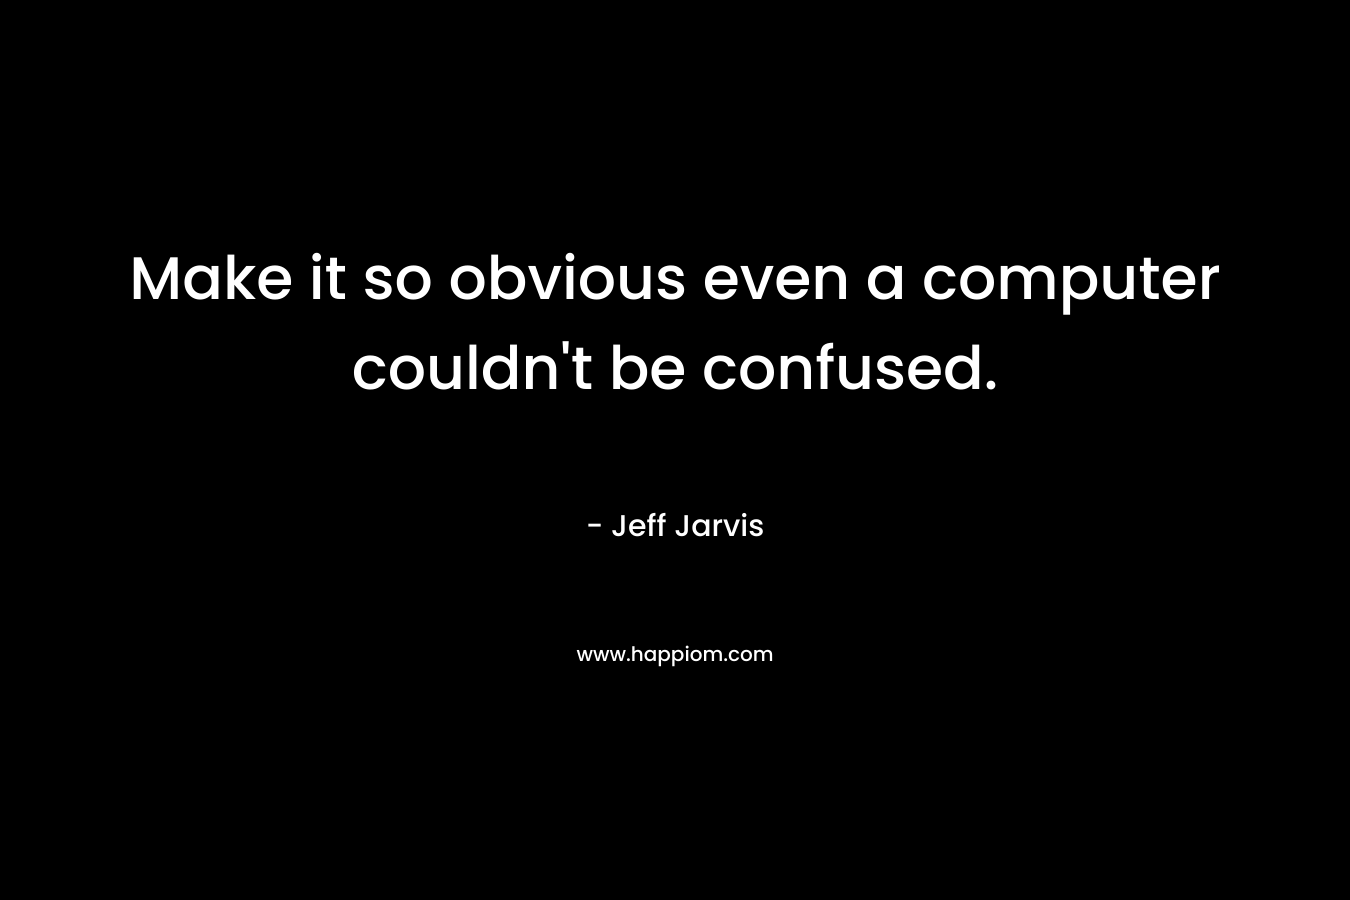 Make it so obvious even a computer couldn’t be confused. – Jeff Jarvis